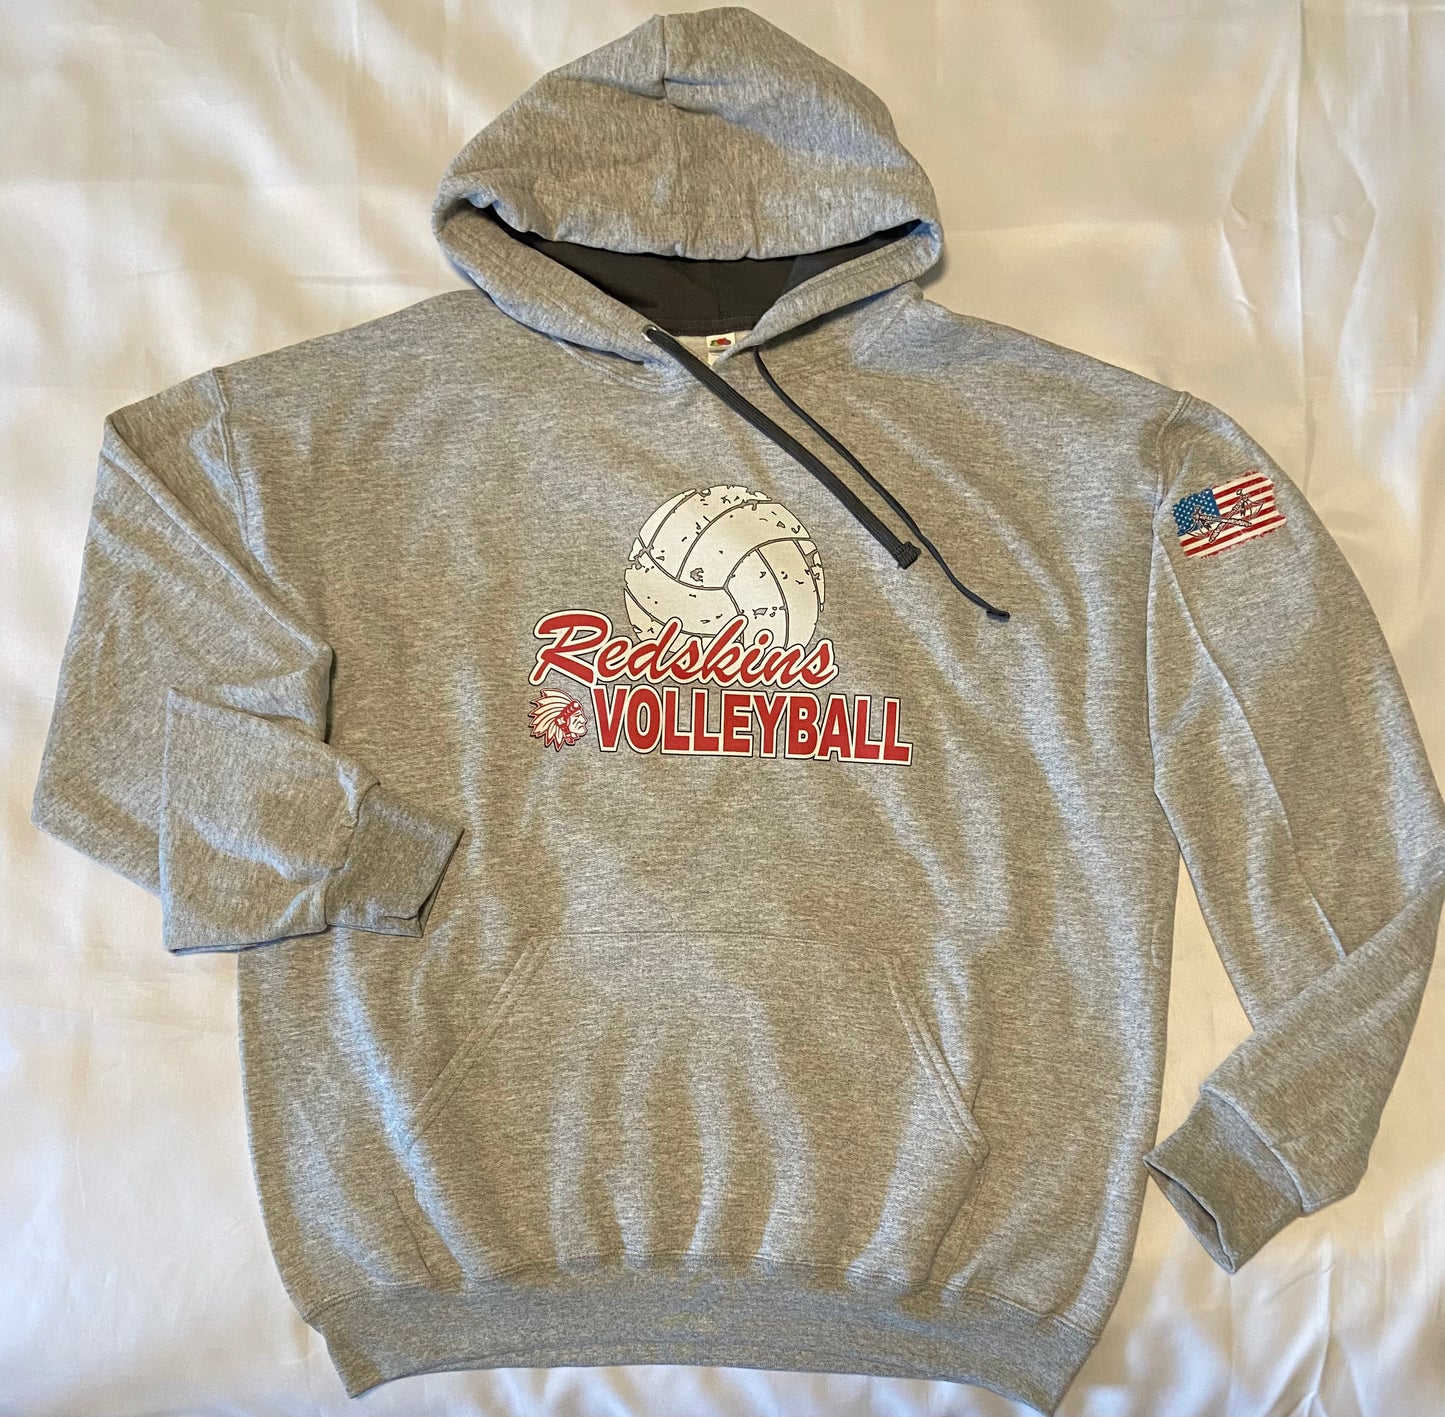 Knox Redskins VOLLEYBALL Team Hoodie - Grey - Adult and Youth Sizes